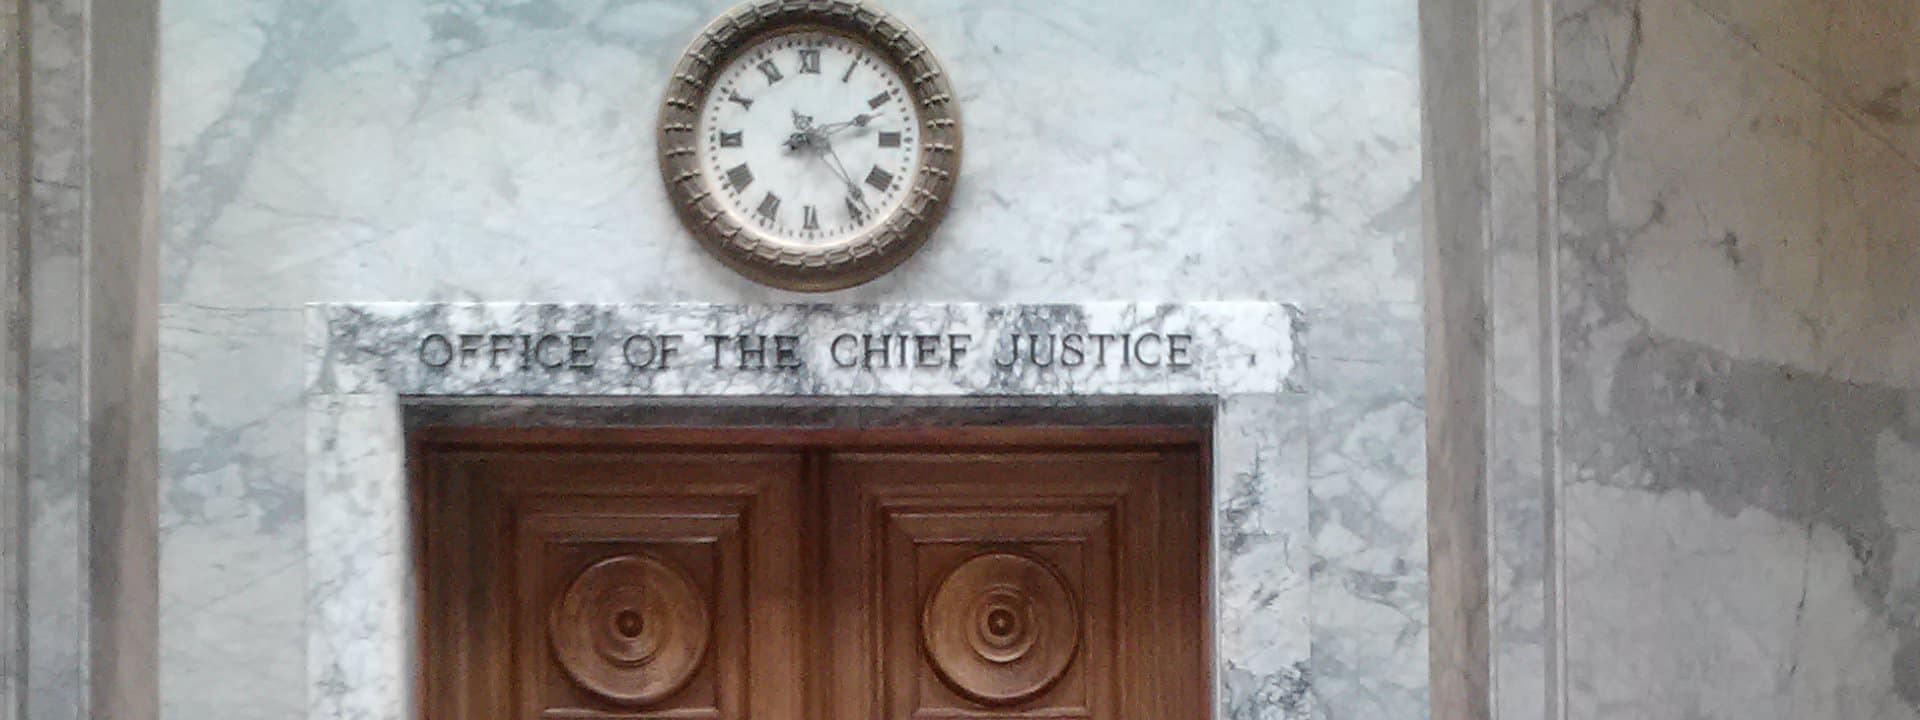 A clock is hanging on a marble wall above a sign that says Office of the Chief Justice